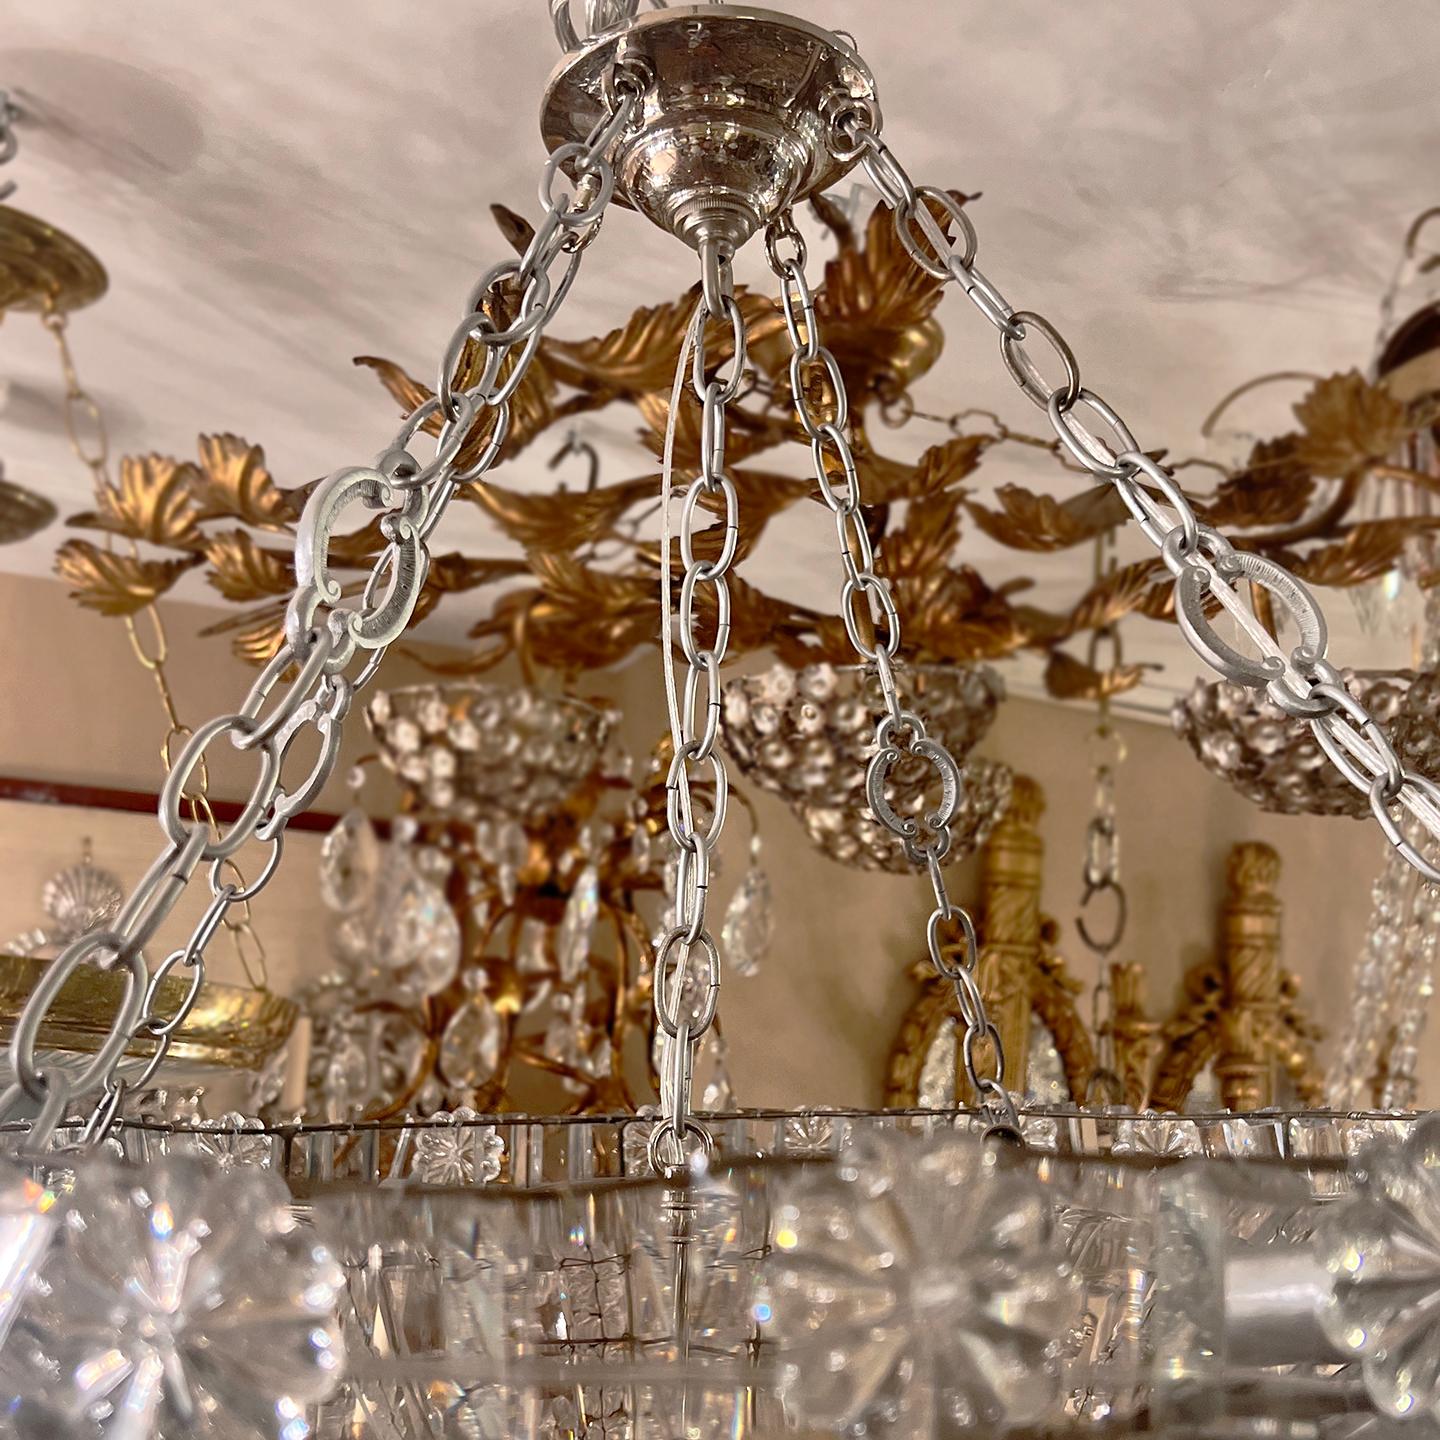 A circa 1900's French woven crystals light fixture with 12 candelabra interior lights.

Measurements:
Present drop: 30